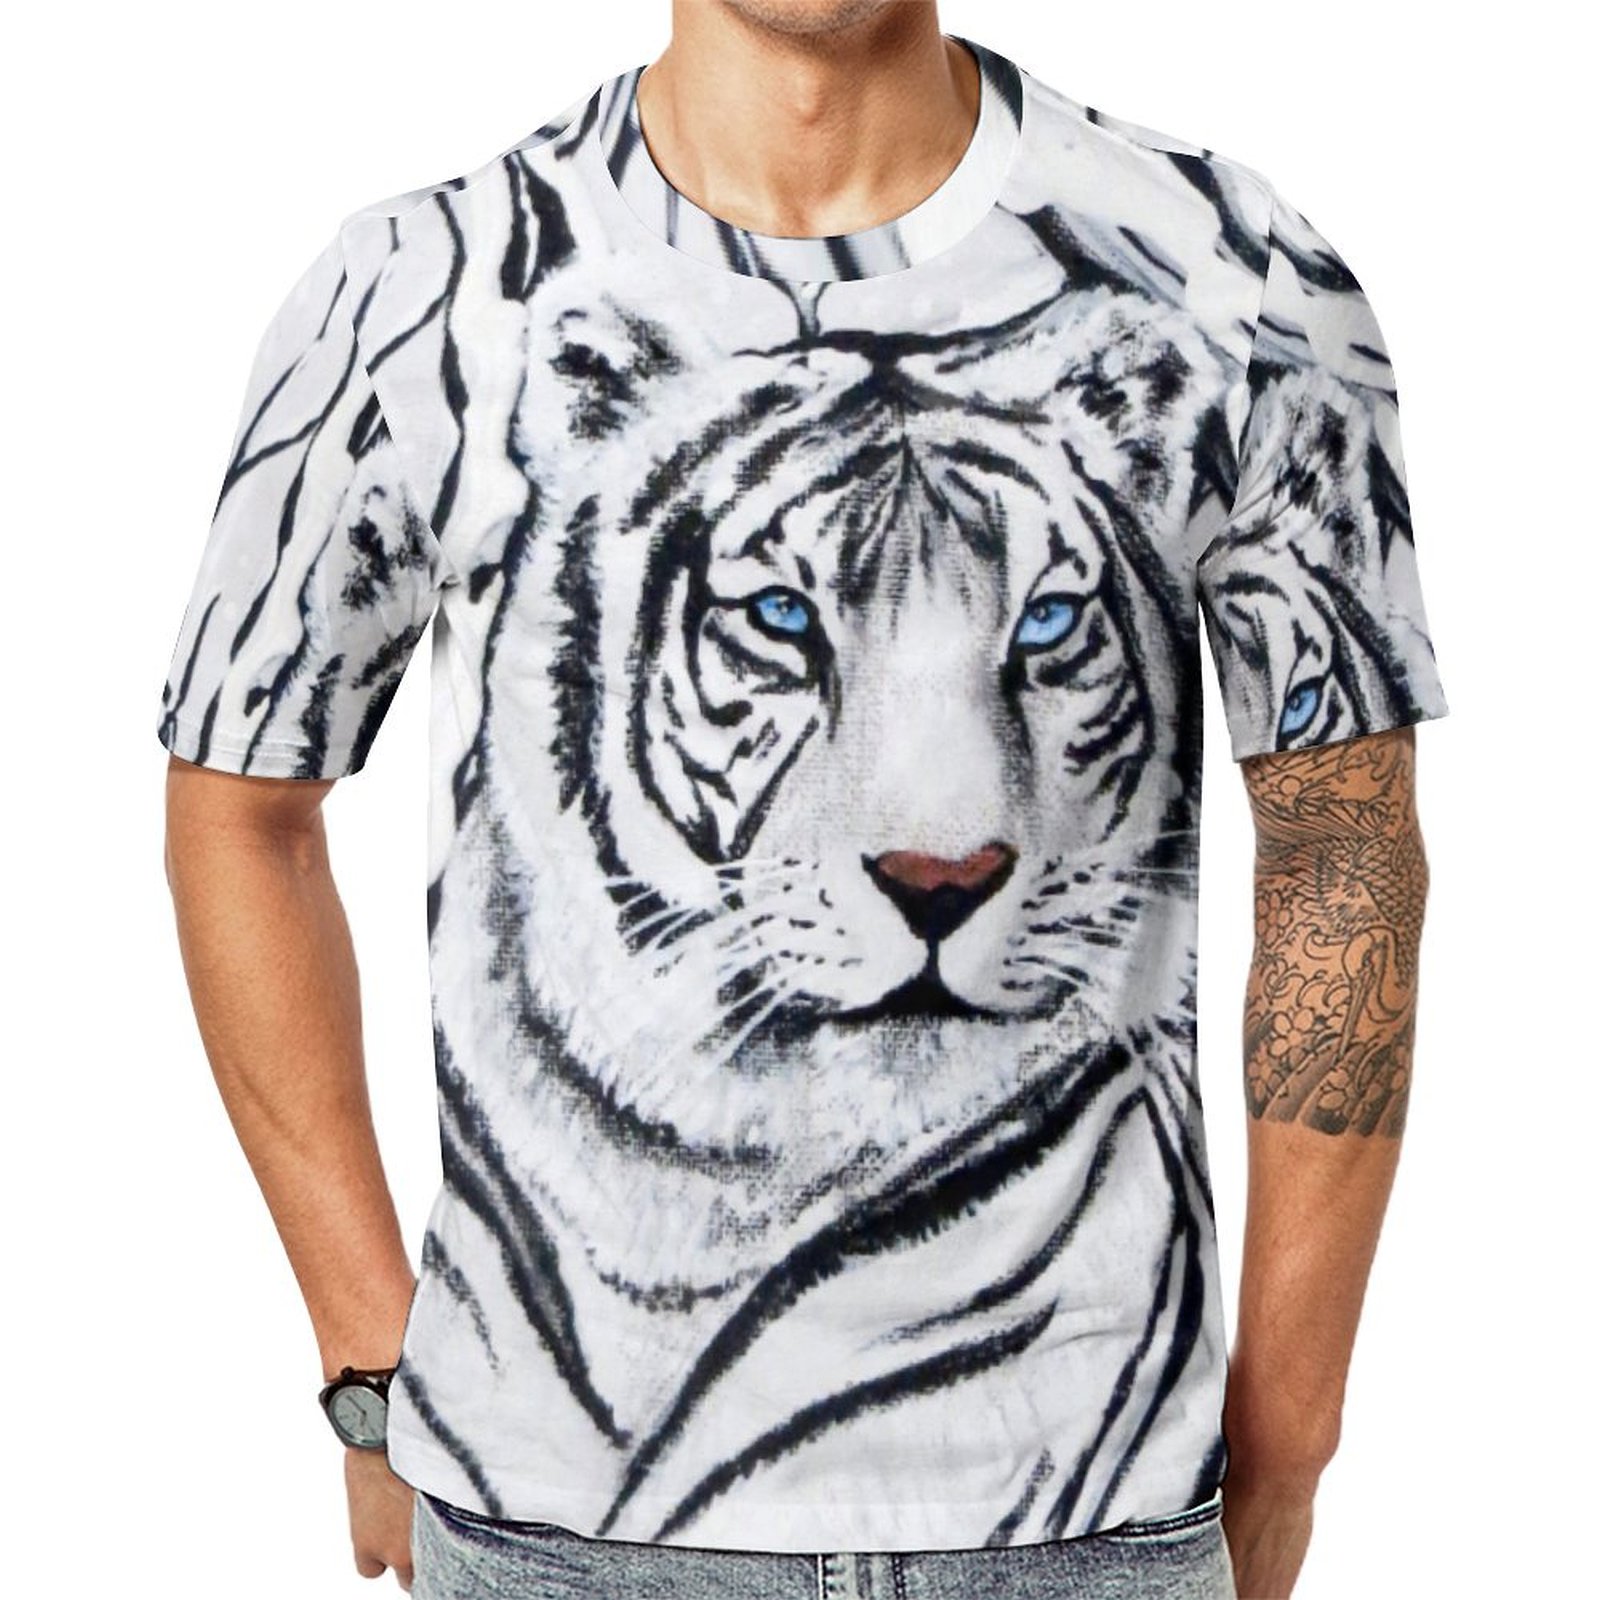 White Black Tiger Head Face Short Sleeve Print Unisex Tshirt Summer Casual Tees for Men and Women Coolcoshirts